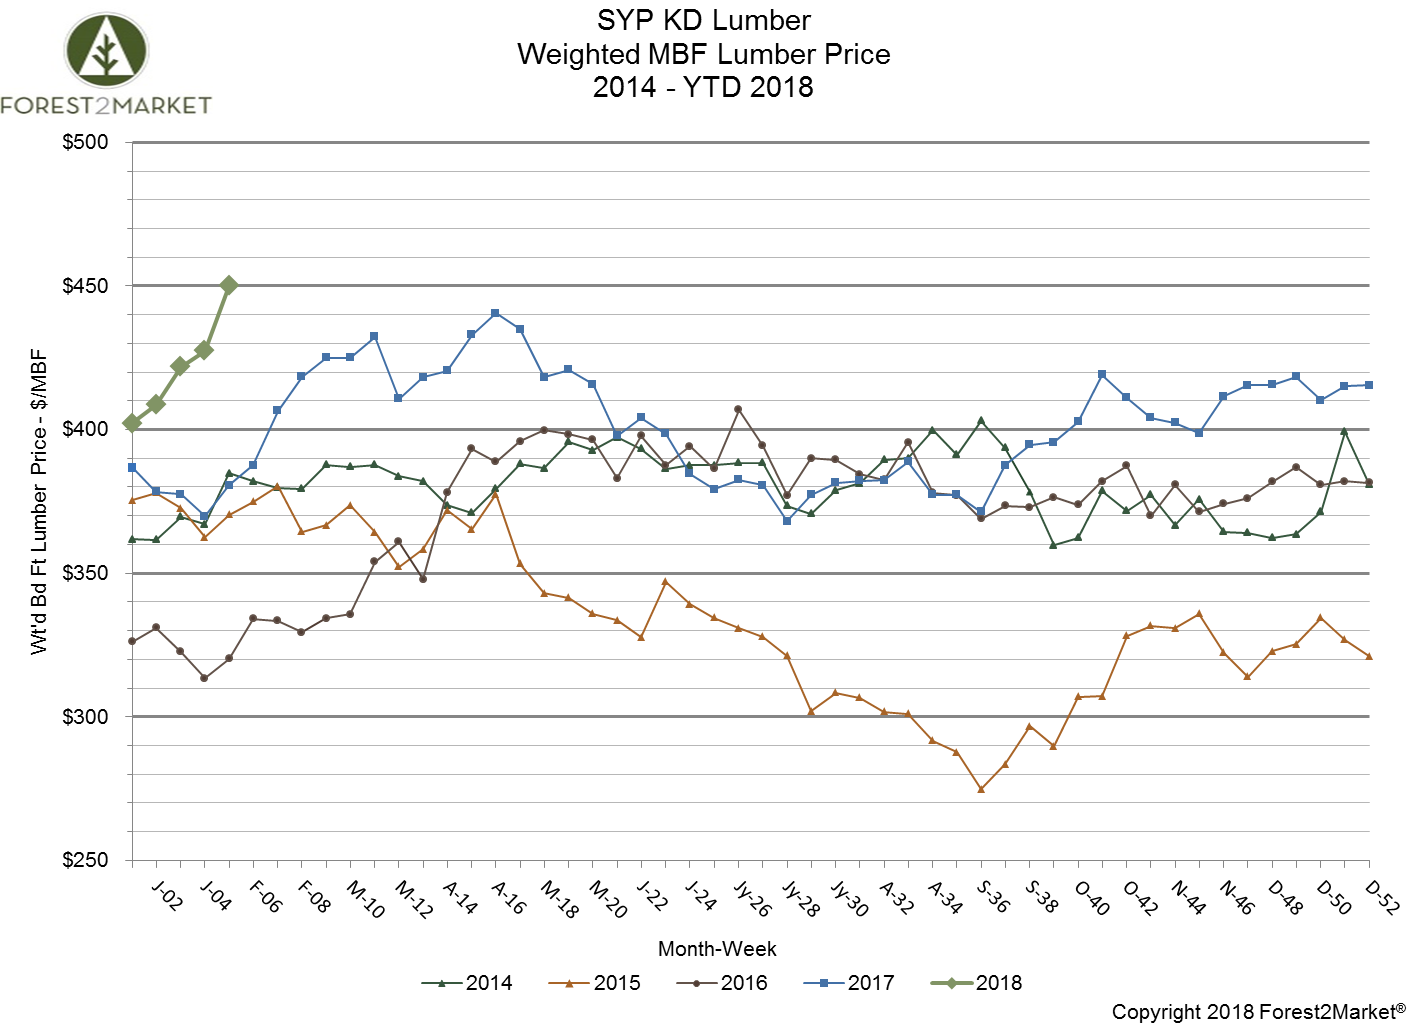 Southern Yellow Pine Lumber Prices Hit New High in February